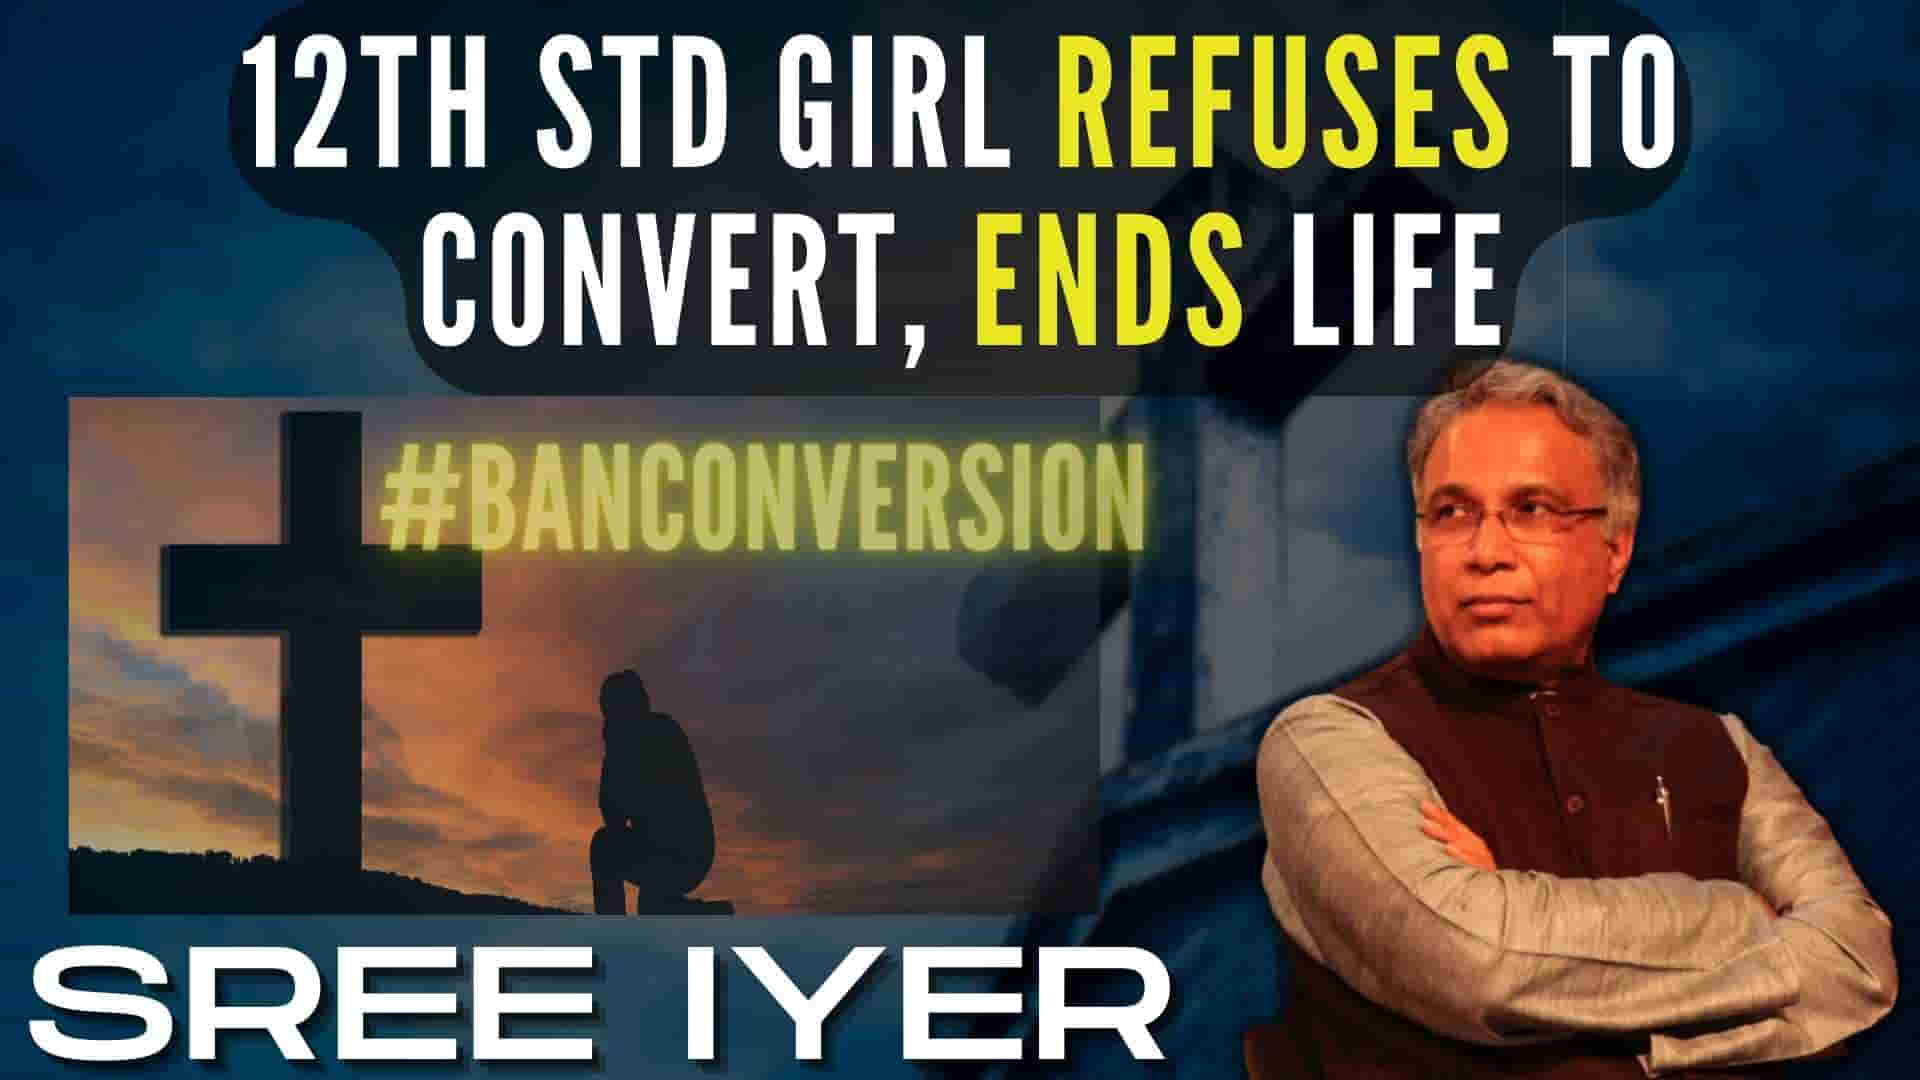 Tamil Nadu and Kerala should follow the example of Karnataka and ban religious conversions now, says Sree Iyer. In addition, there should be incentives to report attempts even after the law is passed to deter this practice.